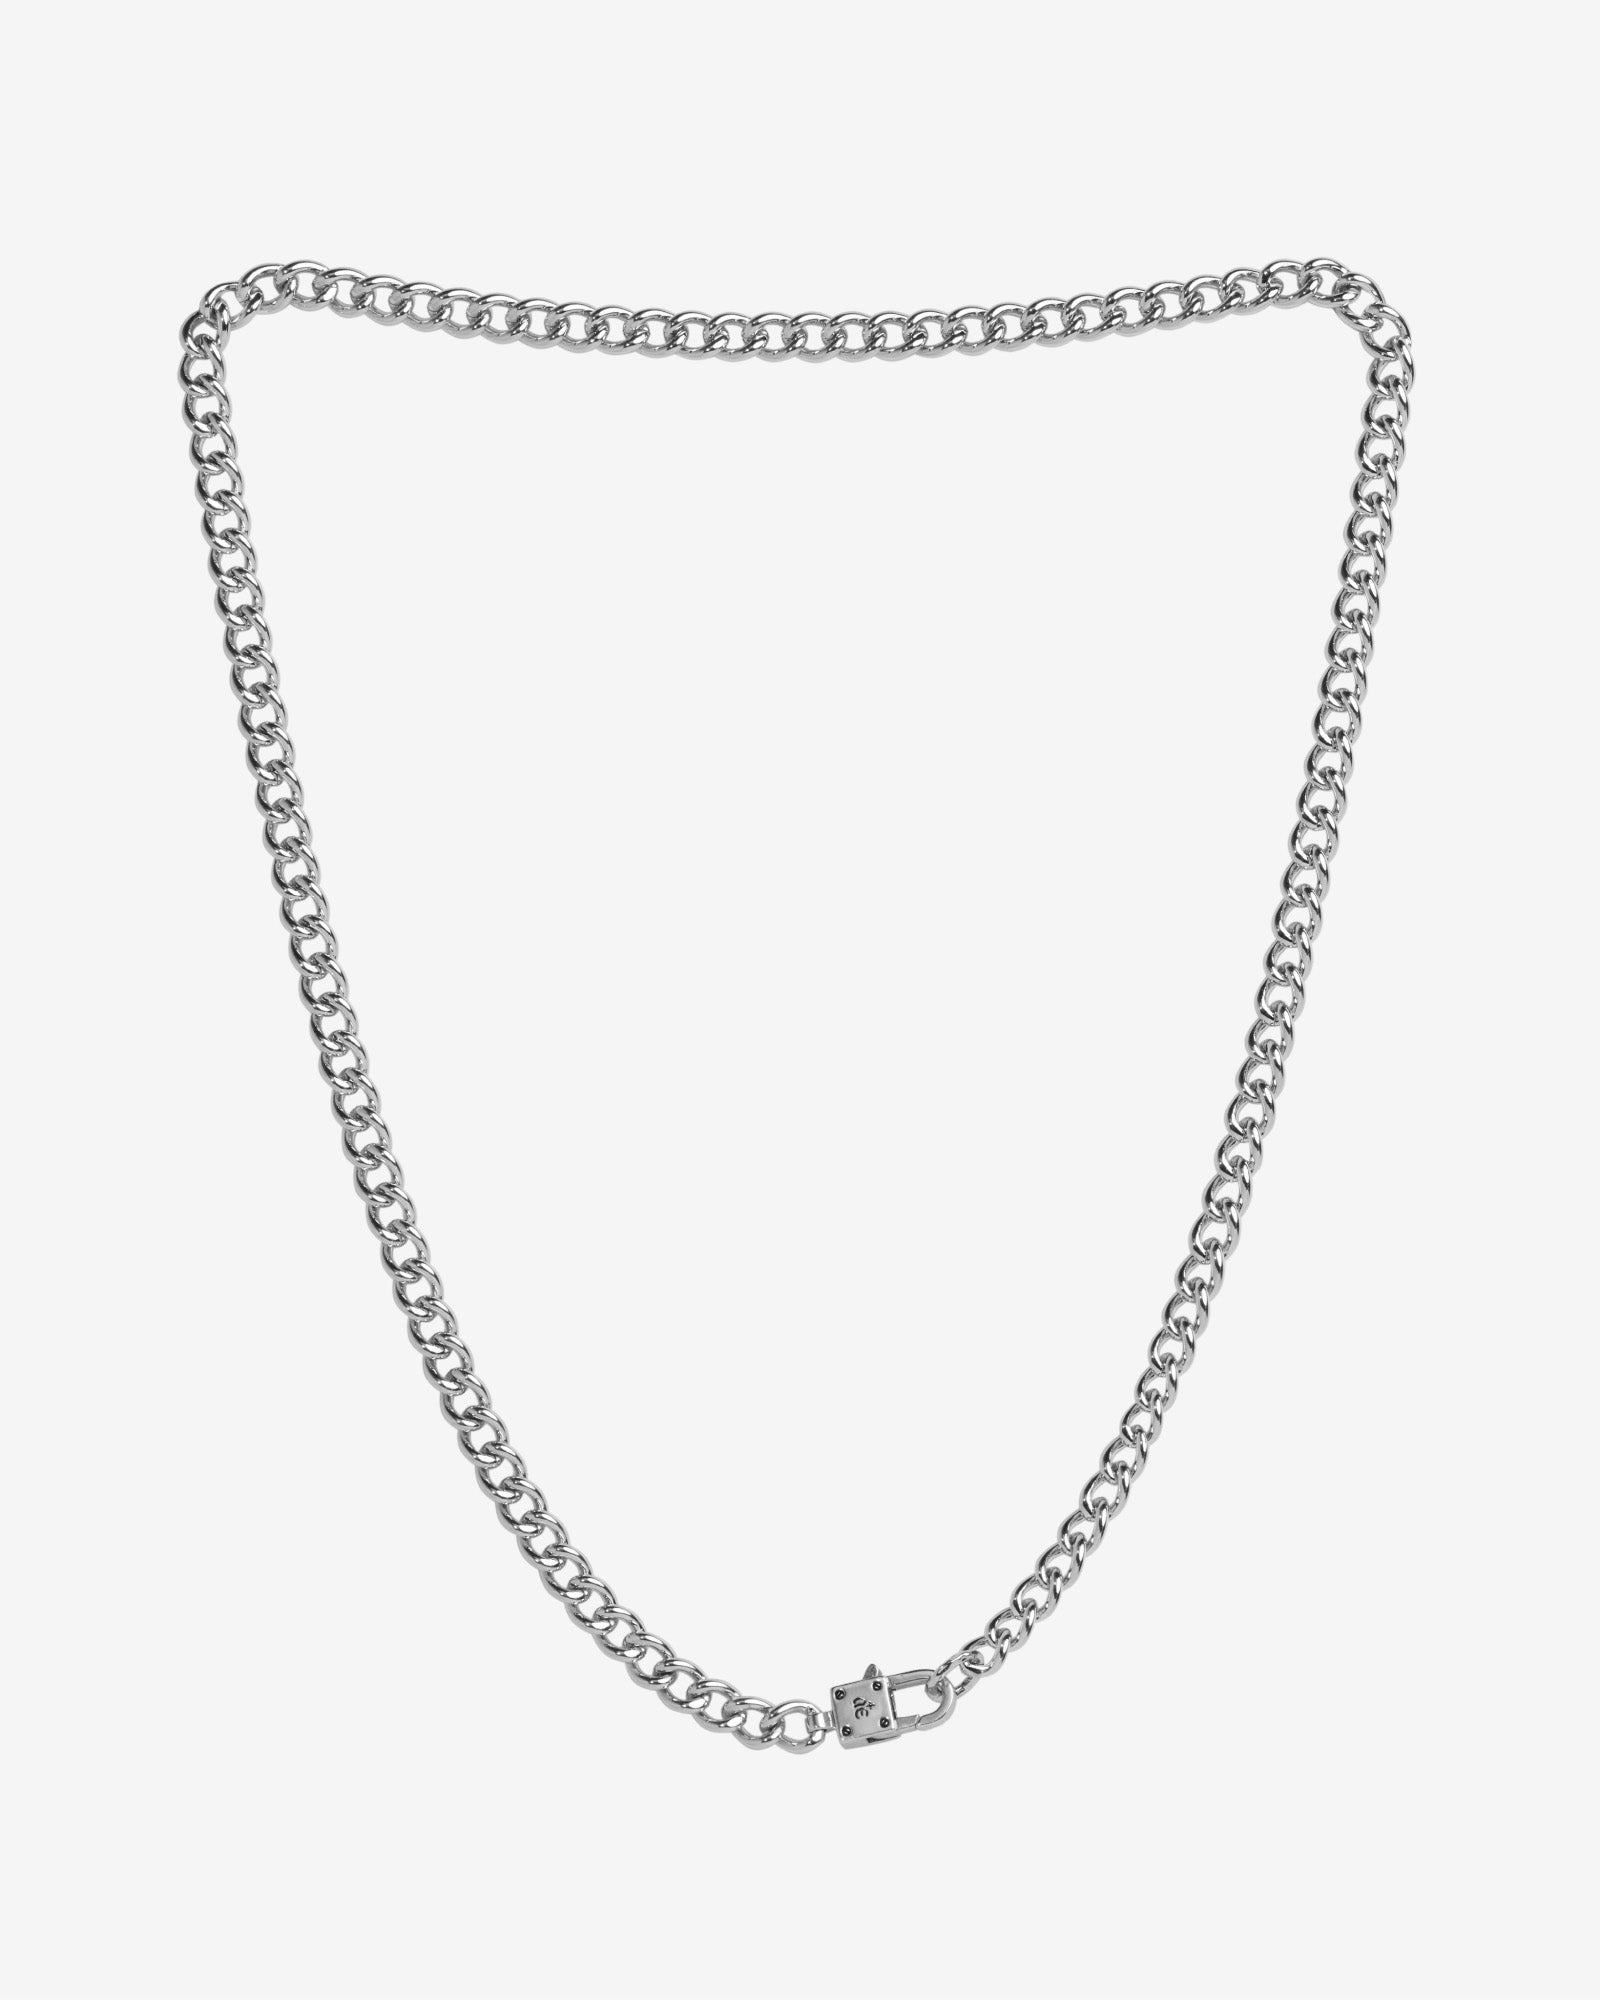 Grunge Heart Chain Necklace | BOOGZEL CLOTHING – Boogzel Clothing